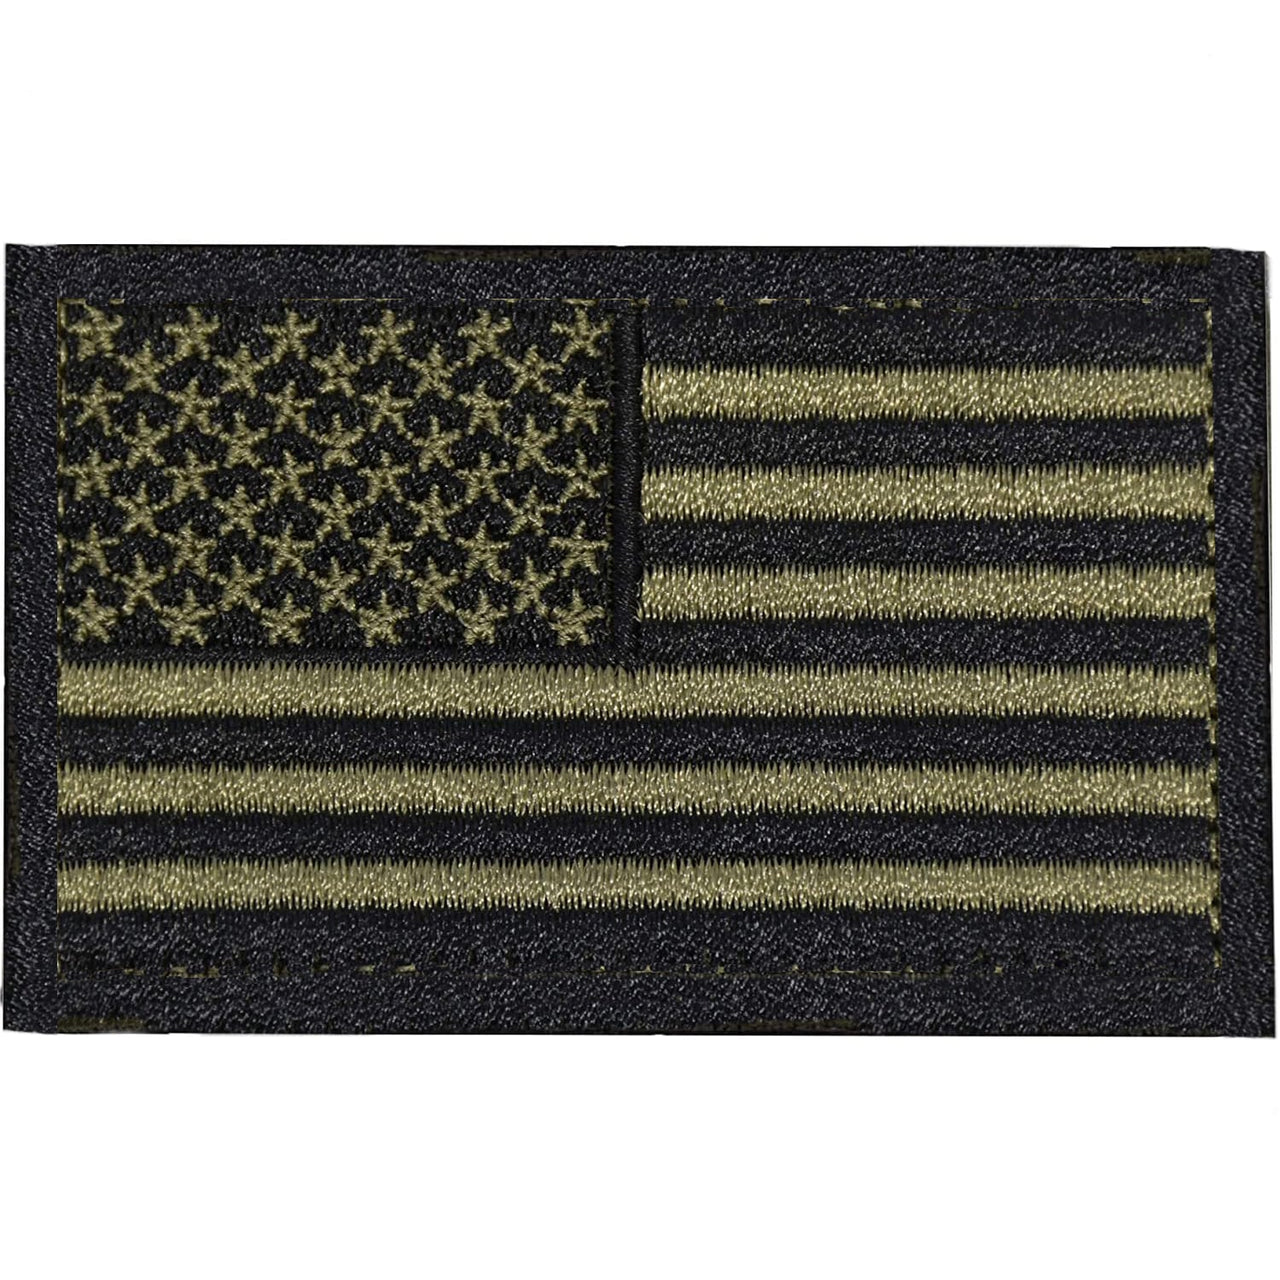 Black and Olive US Flag Patch